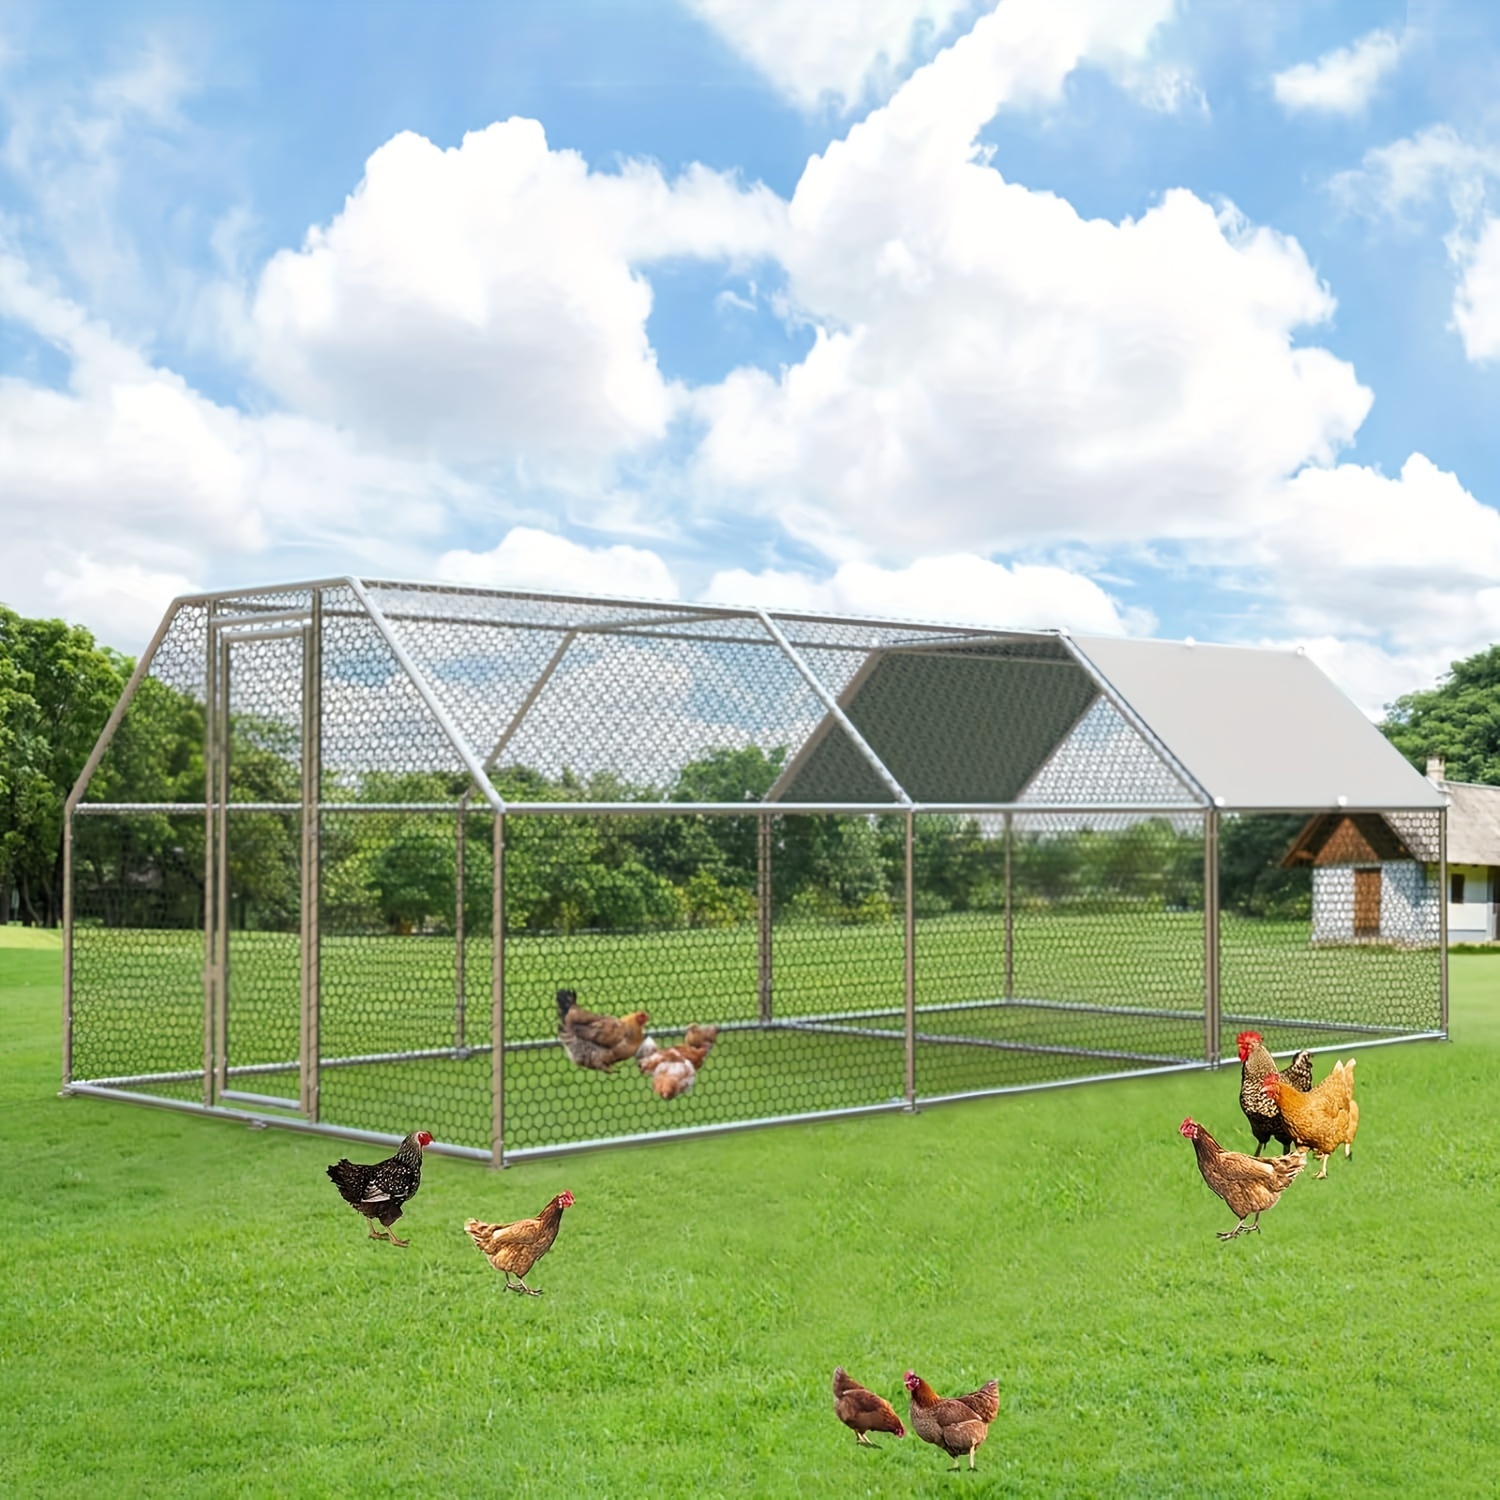 

Large Metal Chicken Coop Cage Walk-in Enclosure Poultry Hen Run House Playpen Exercise Pen Outdoor Yard Poultry Pet Hutch With Weather Proof Cover (19.7 X 9.9 X 6.57 Ft, Flat Roofs)